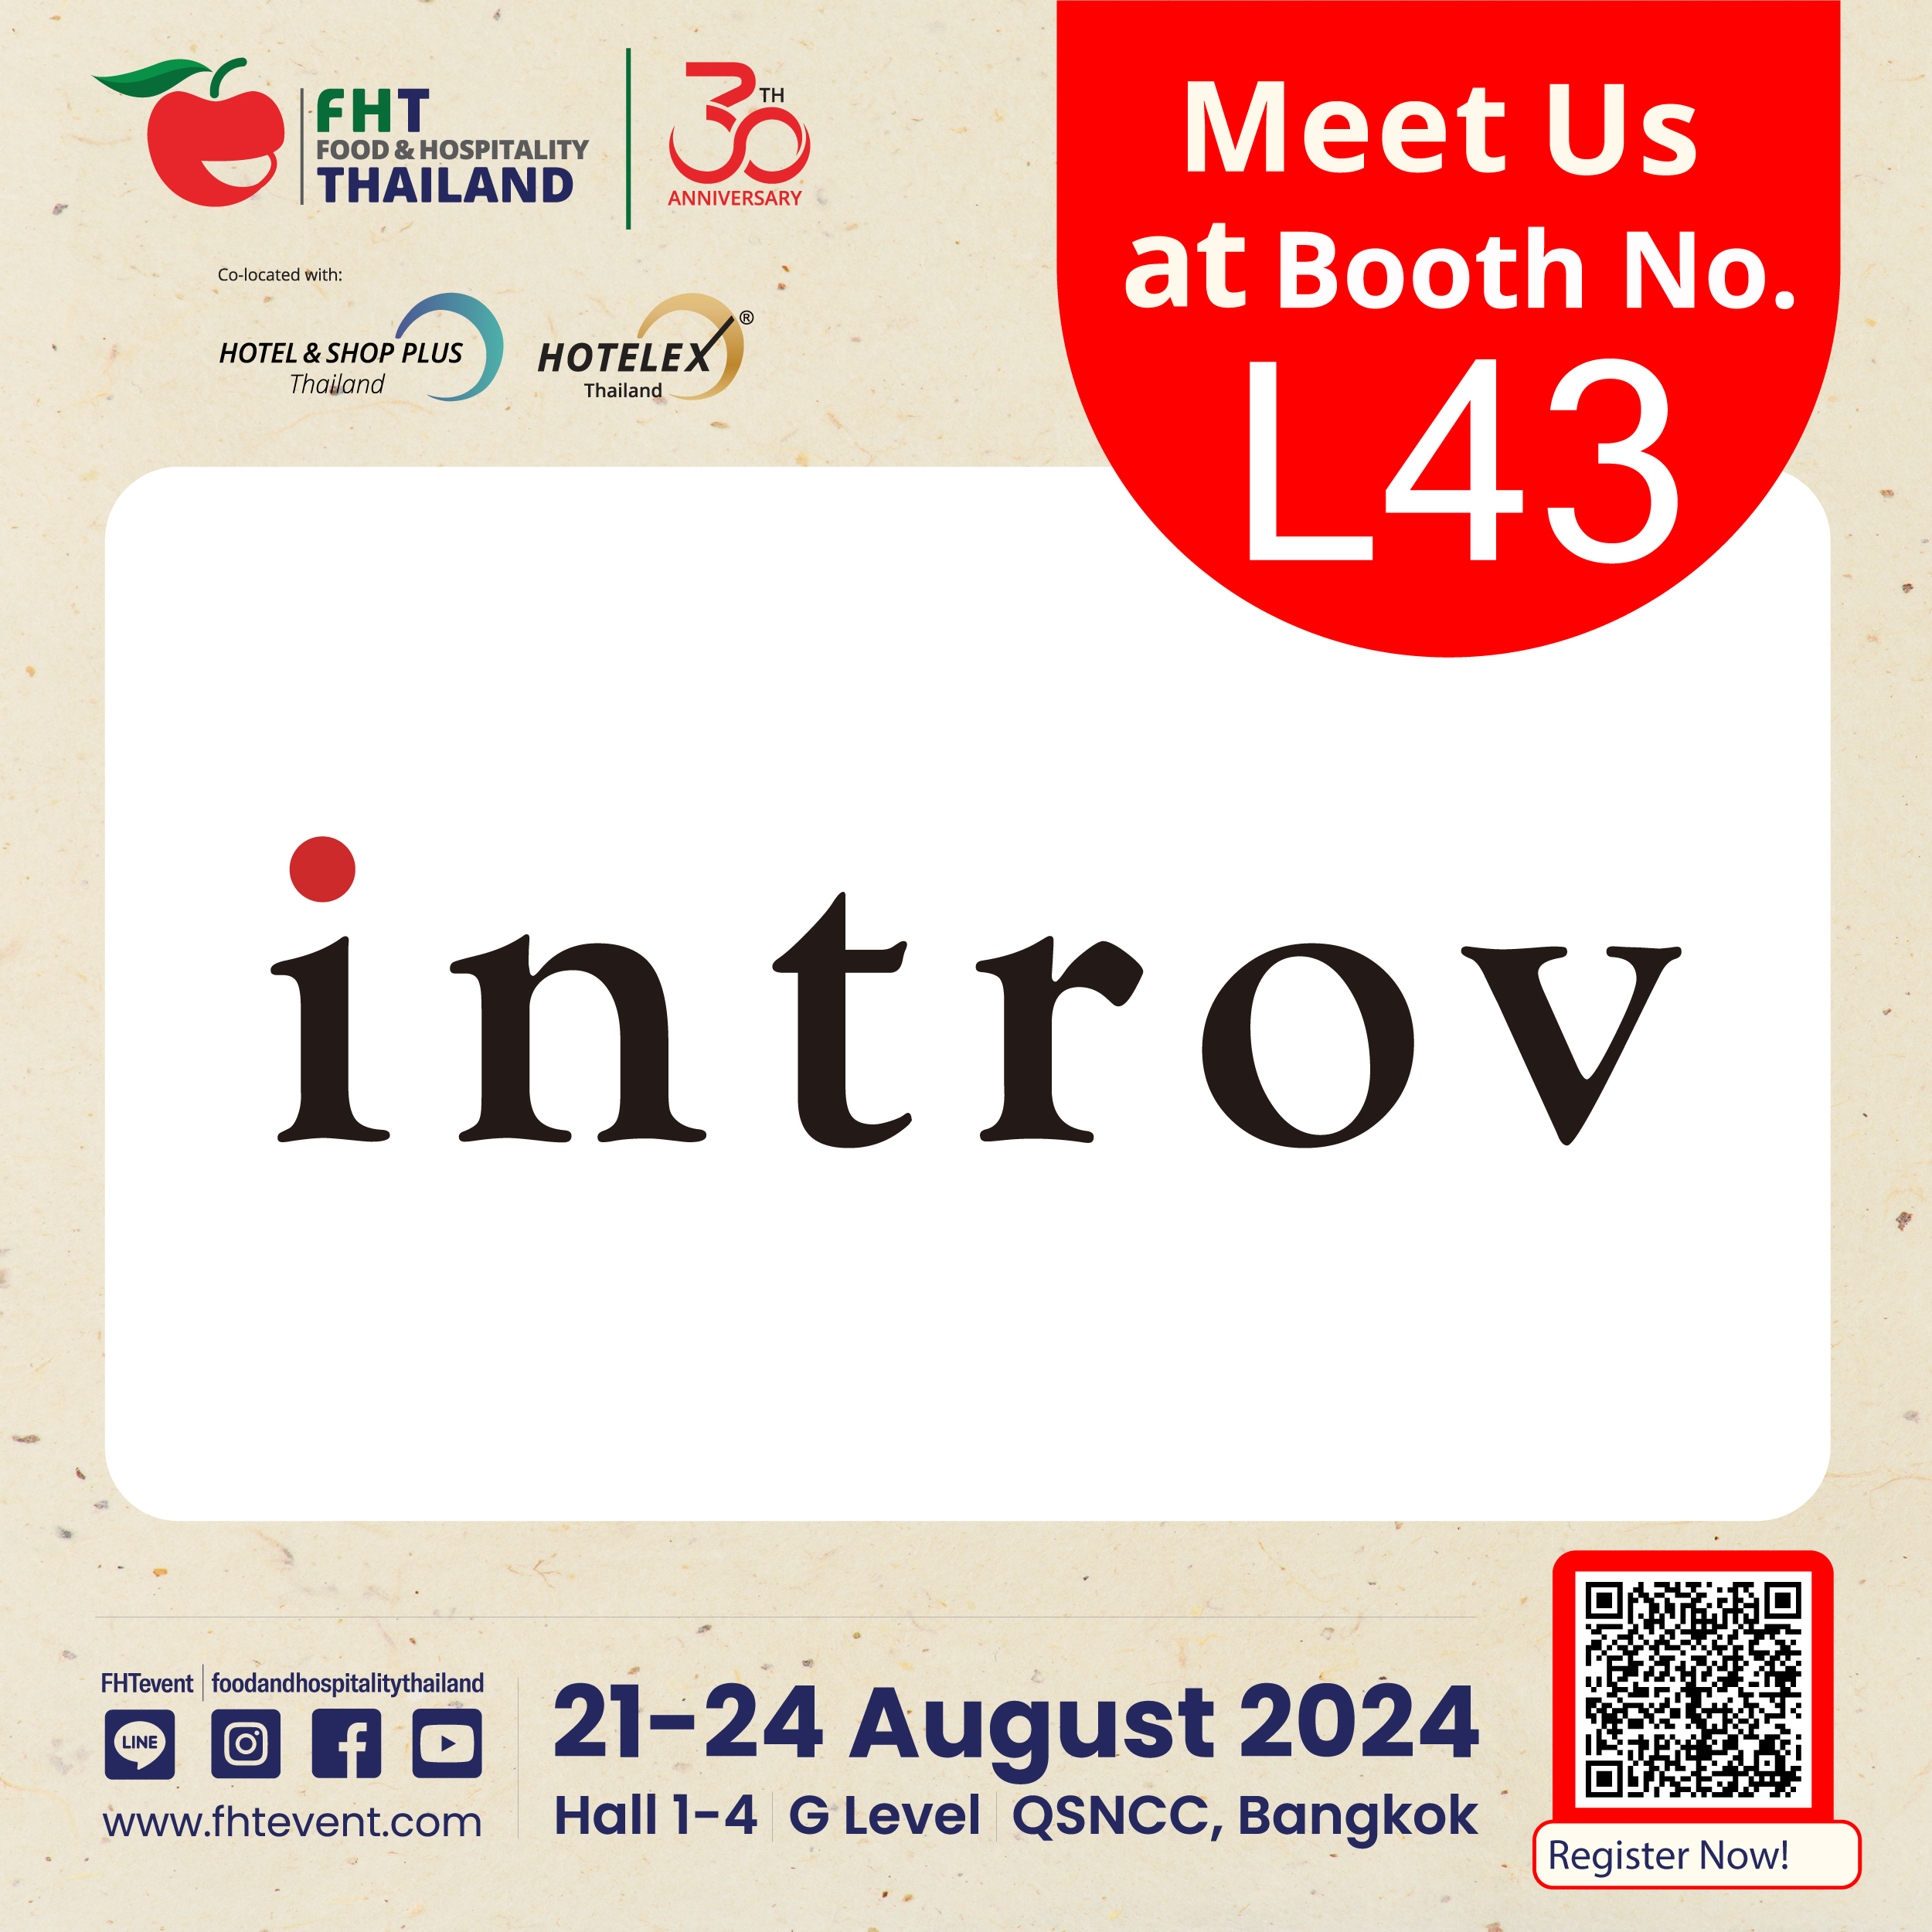 Introv will participate Food & Hospitality Thailand Tradeshow – FHT 2024 (21-24 Aug 2024)